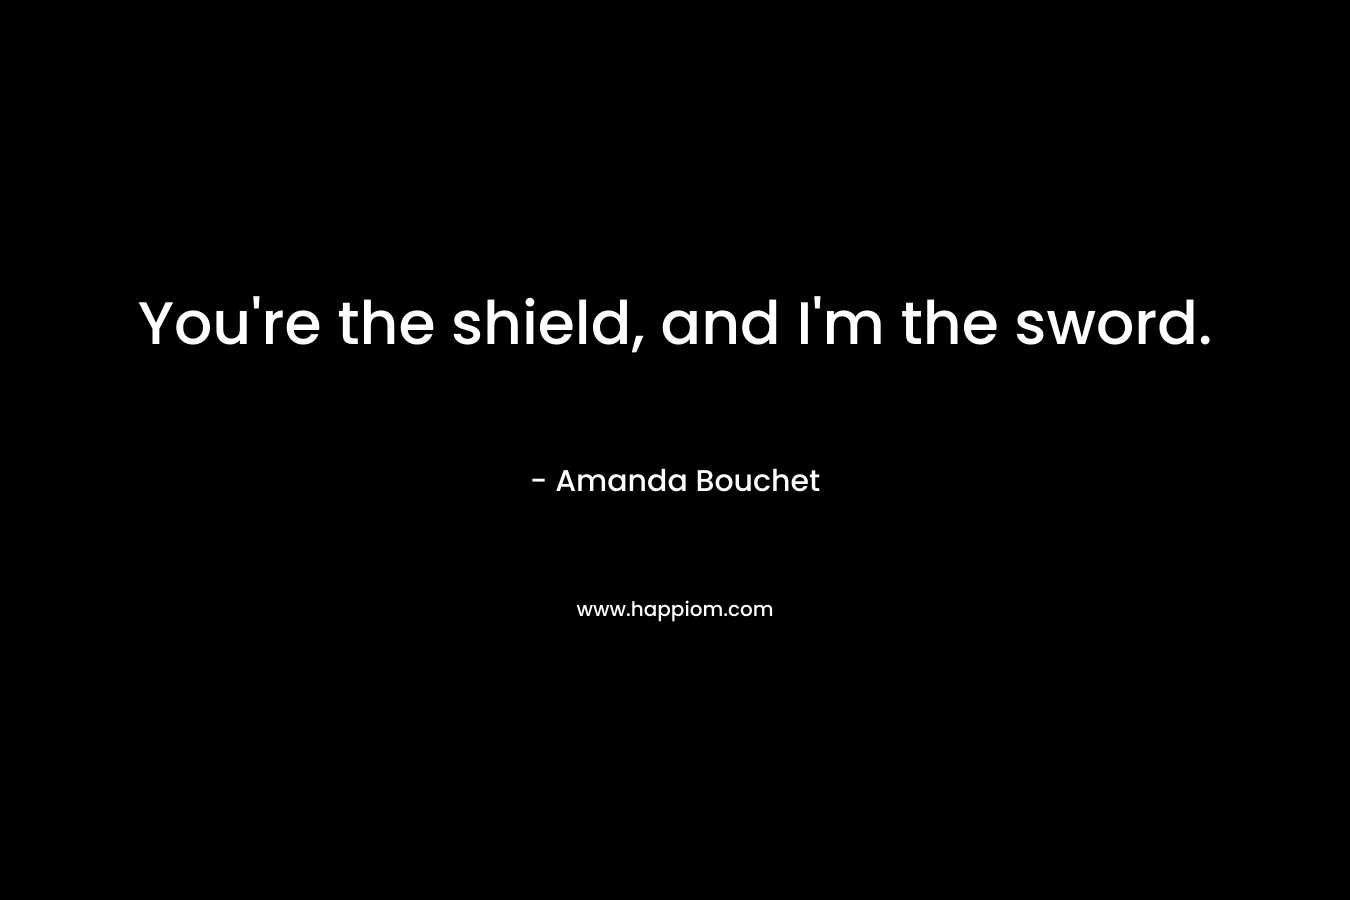 You’re the shield, and I’m the sword. – Amanda Bouchet